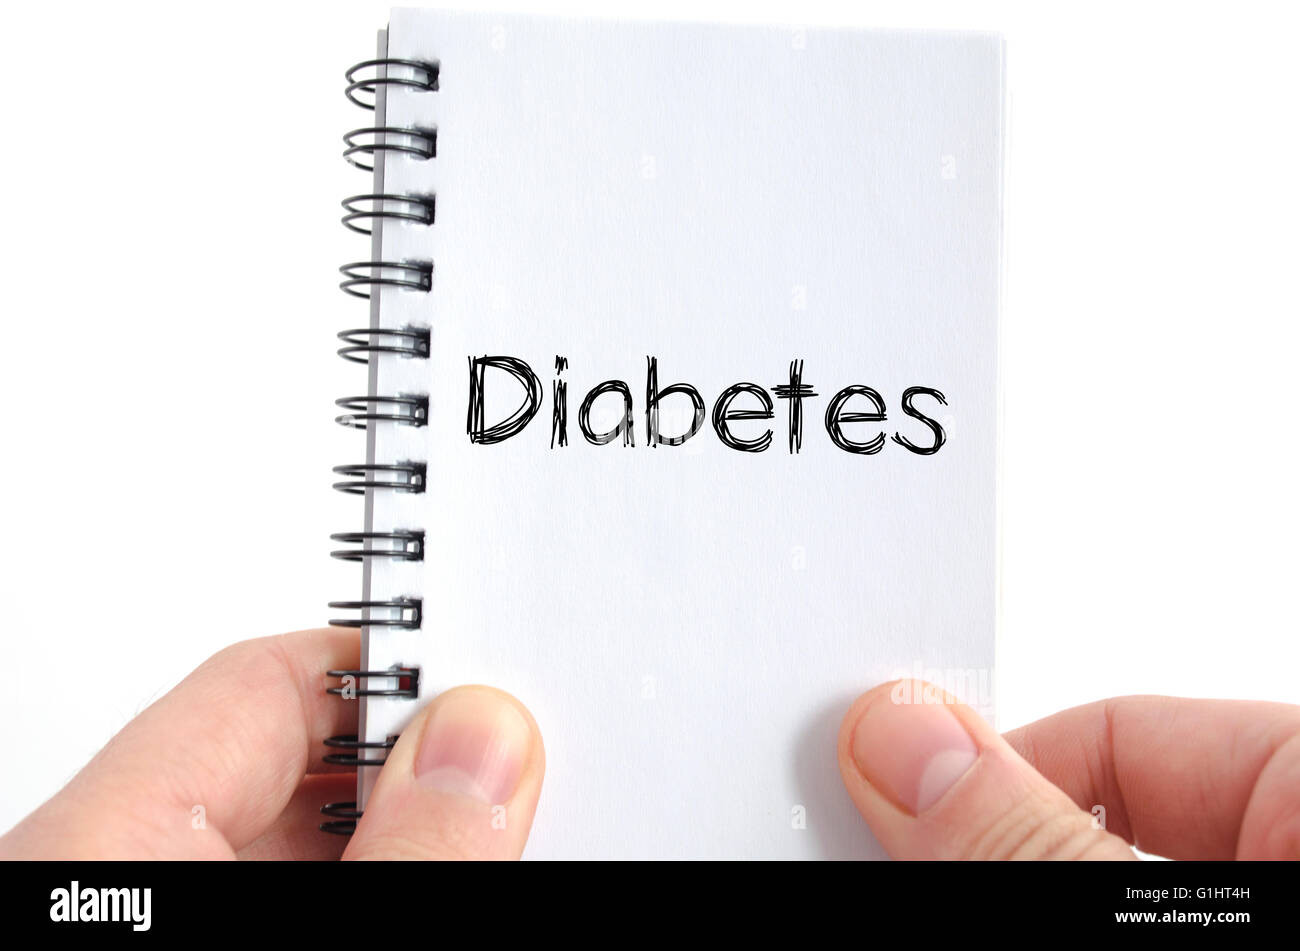 Diabetes text concept isolated over white background Stock Photo